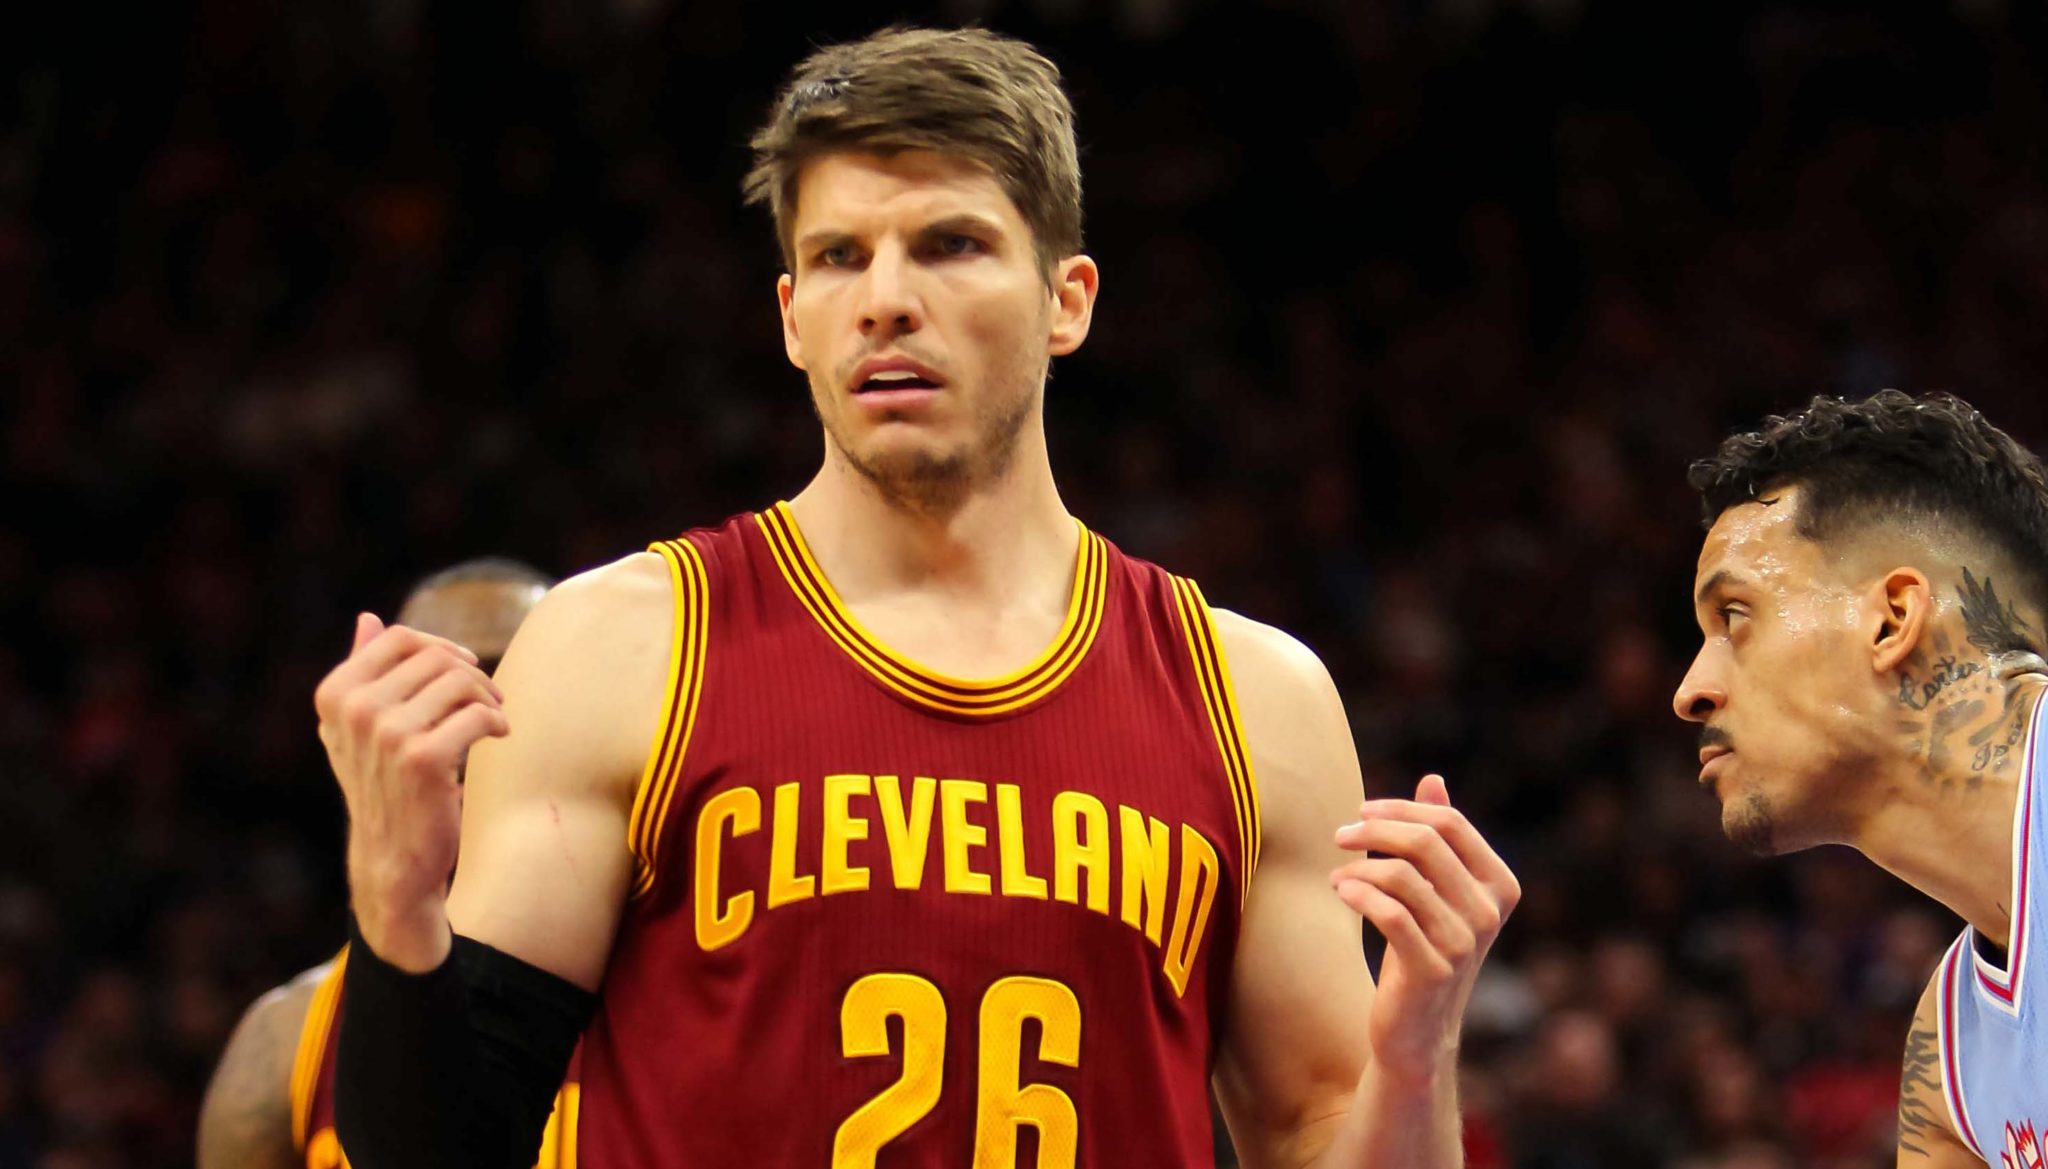 Cavs news: Kyle Korver excused from team after brother's passing